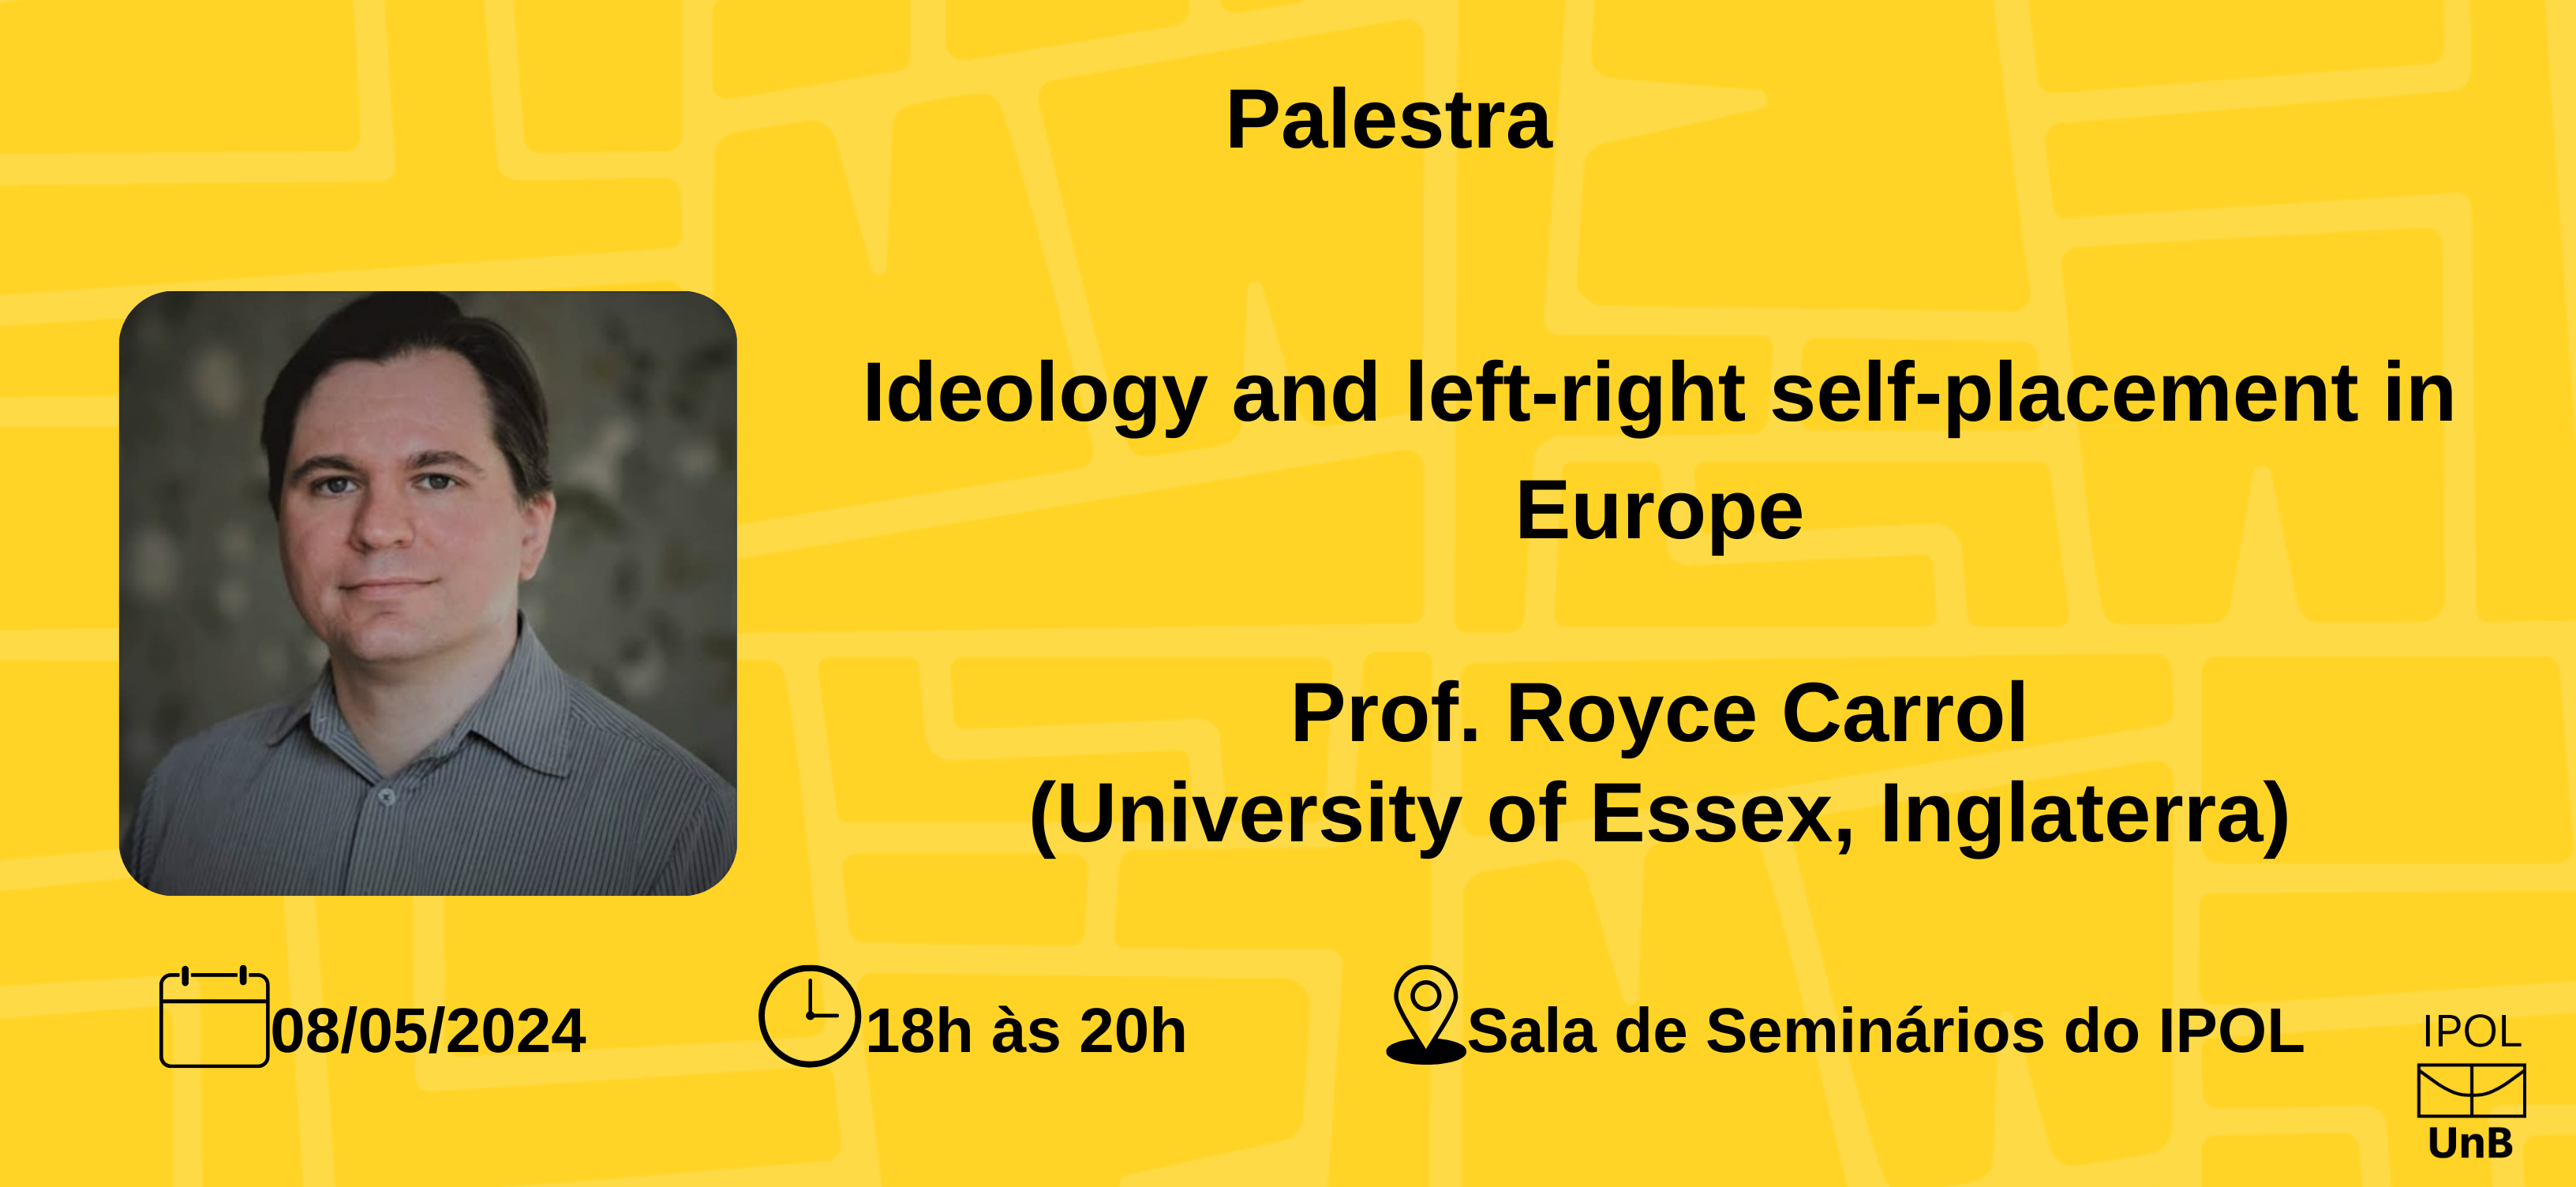 Palestra: Ideology and left-right self-placement in Europe